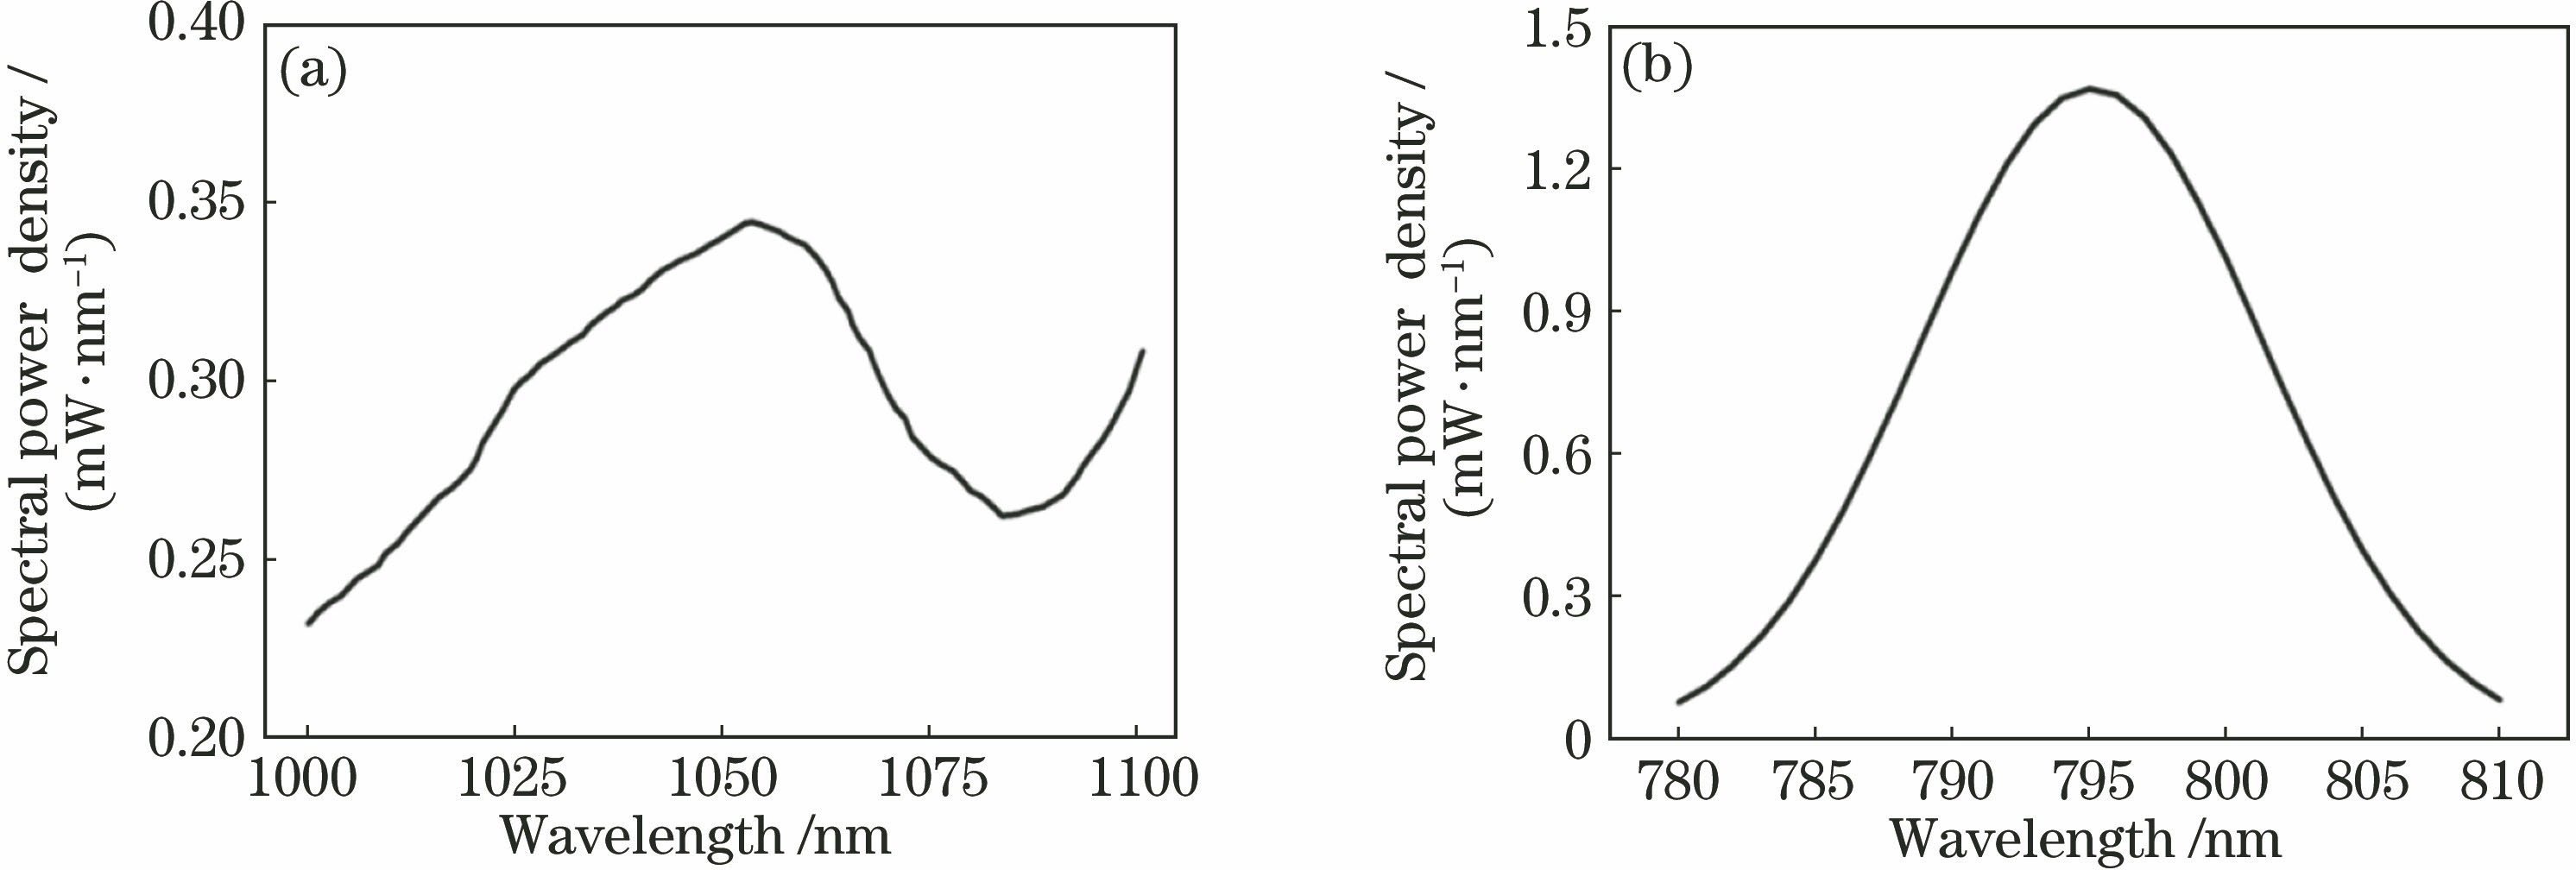 Distribution of spectral power density. (a) Imaging light source; (b) beacon light source